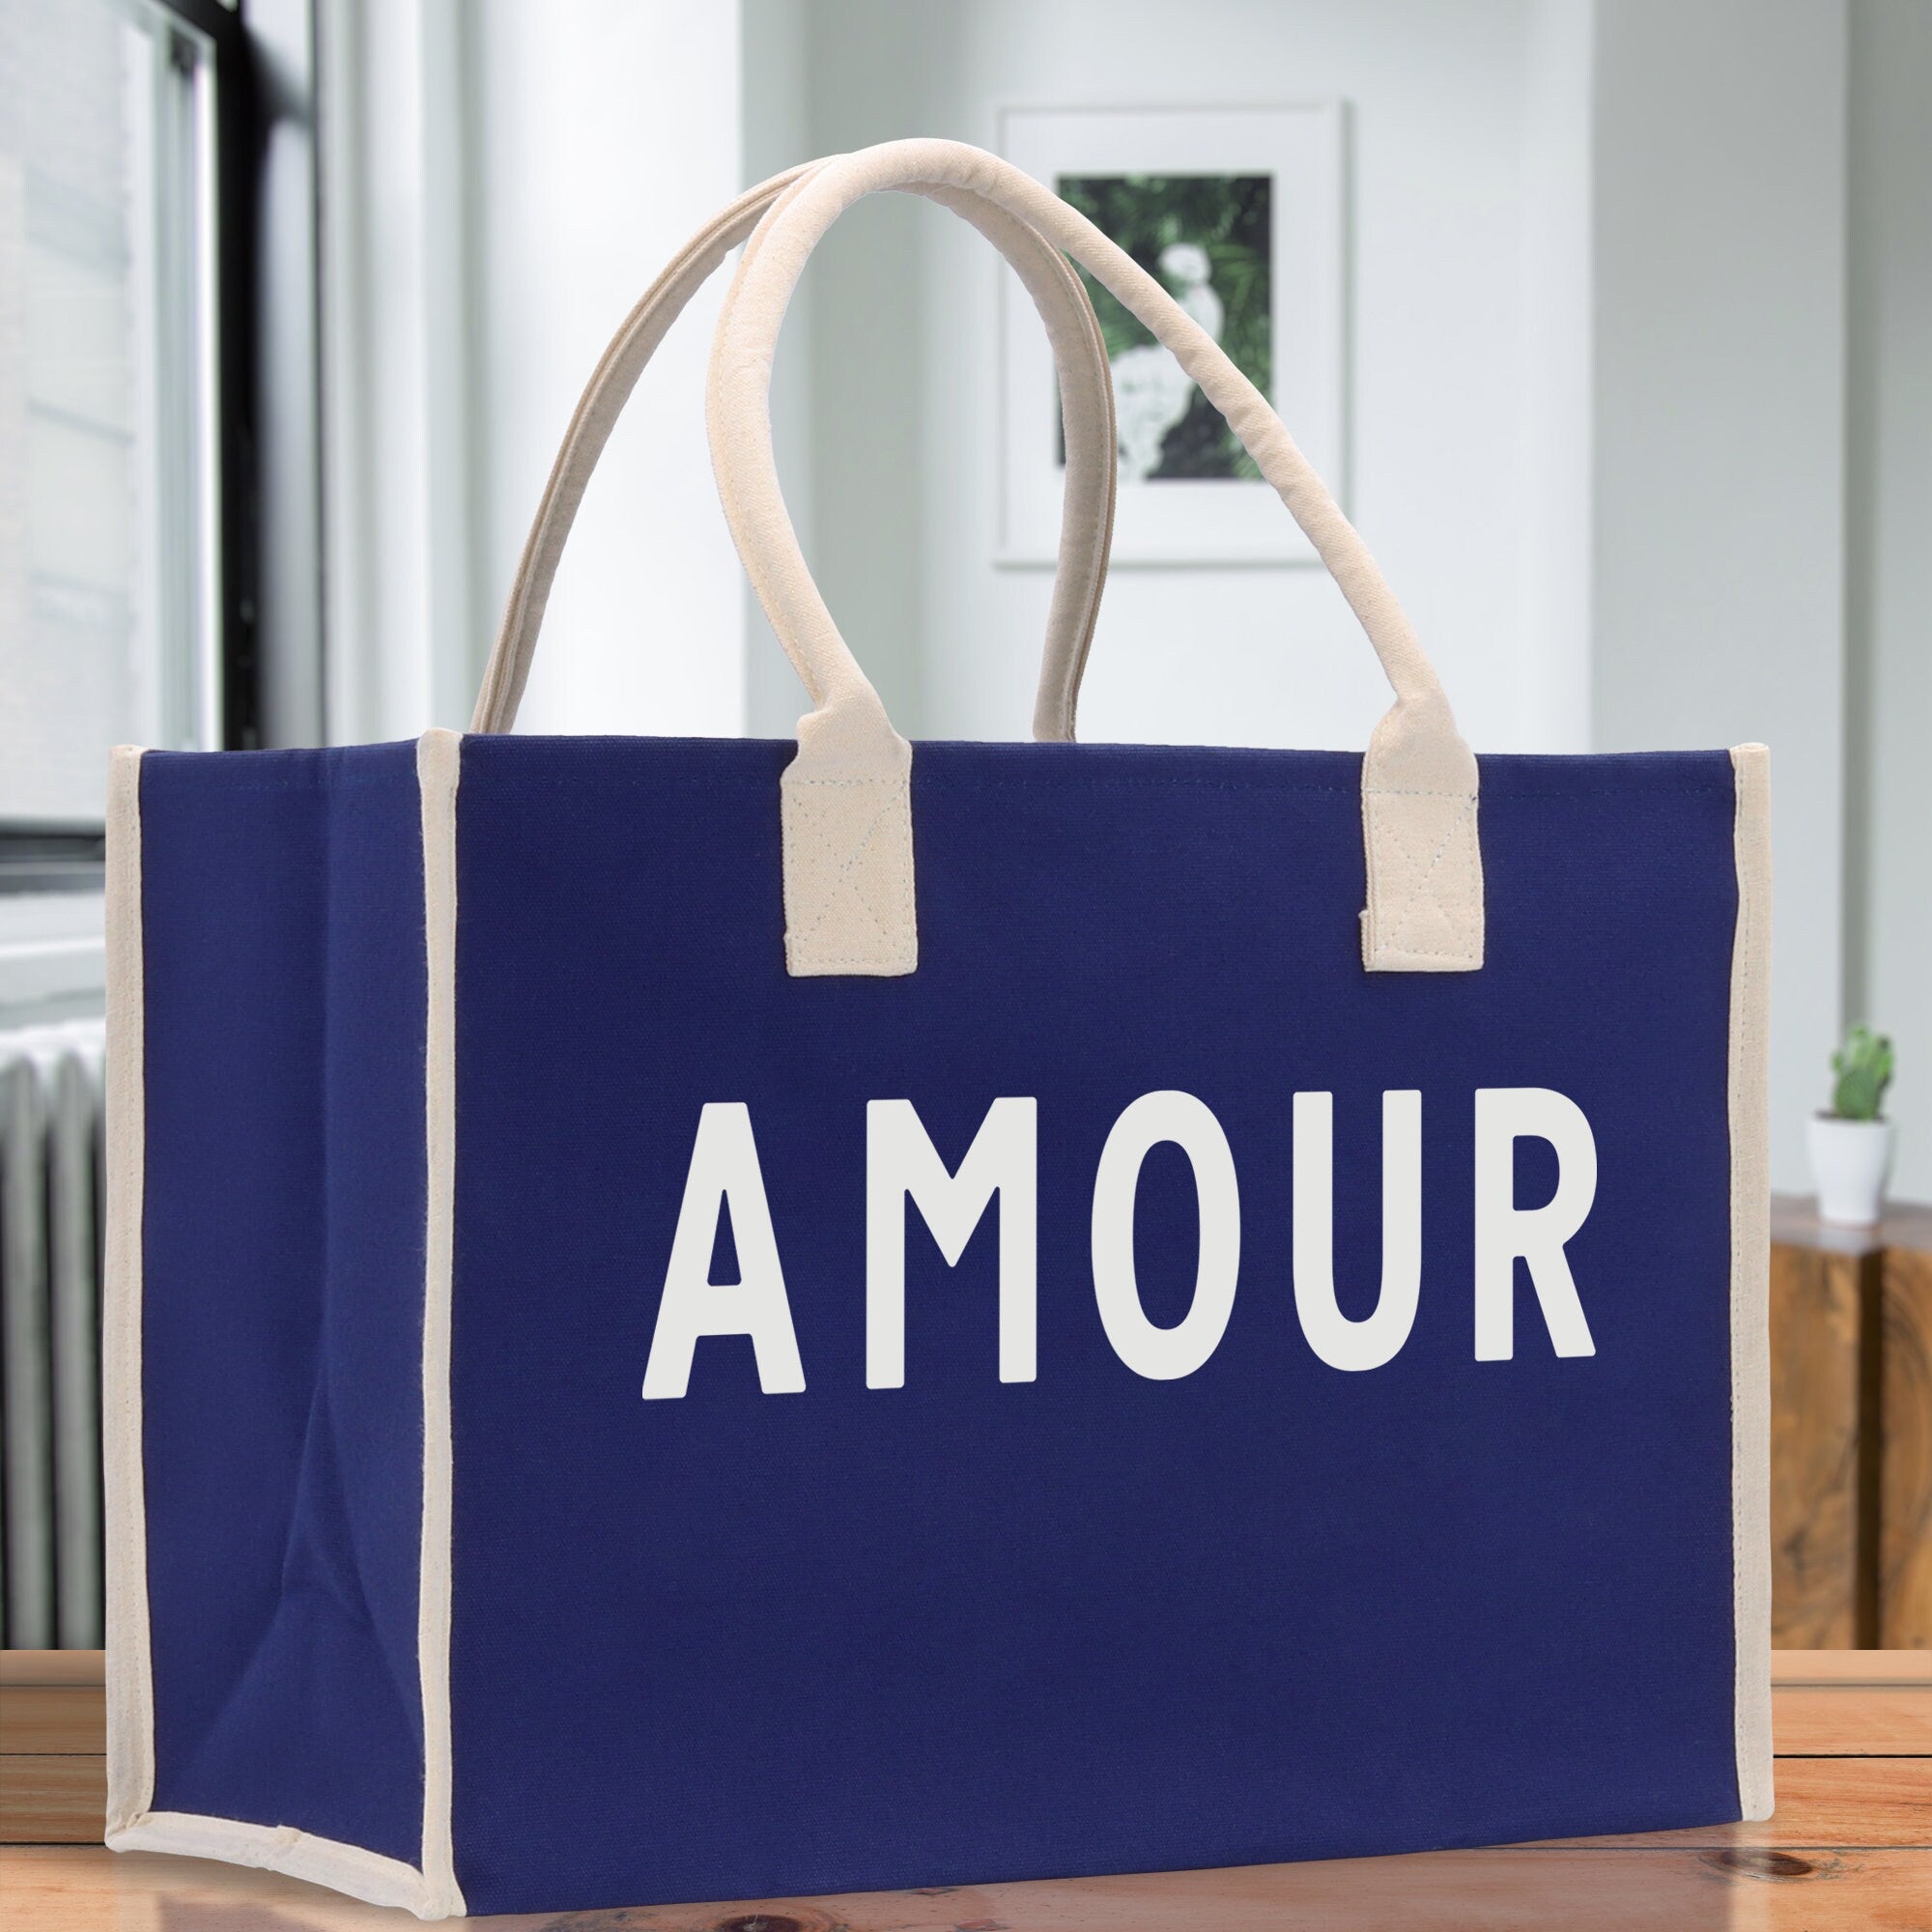 Amour Cotton Canvas Chic Beach Tote Bag Multipurpose Tote Weekender Tote Gift for Her Outdoor Tote Vacation Tote Large Beach Bag